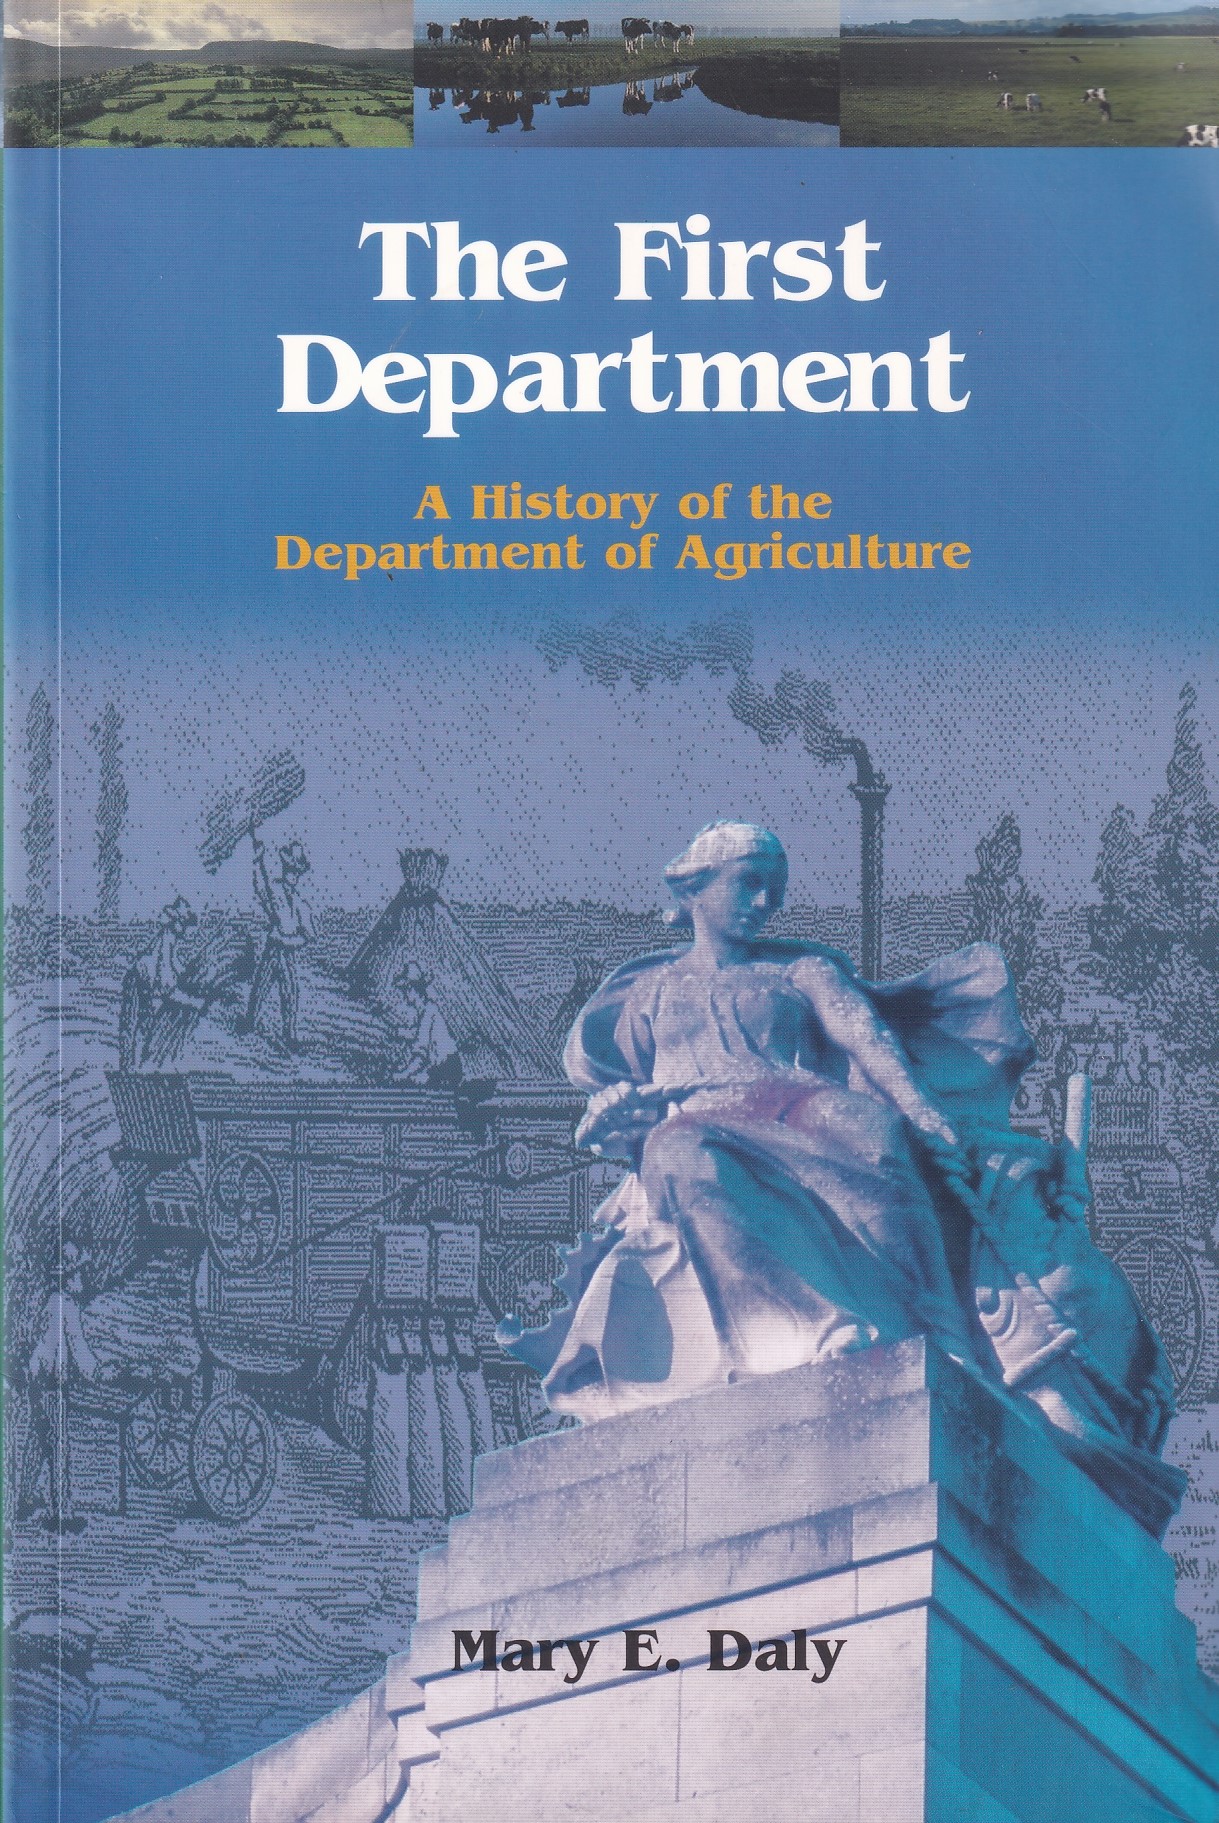 The First Department: A History of the Department of Agriculture | Mary E. Daly | Charlie Byrne's